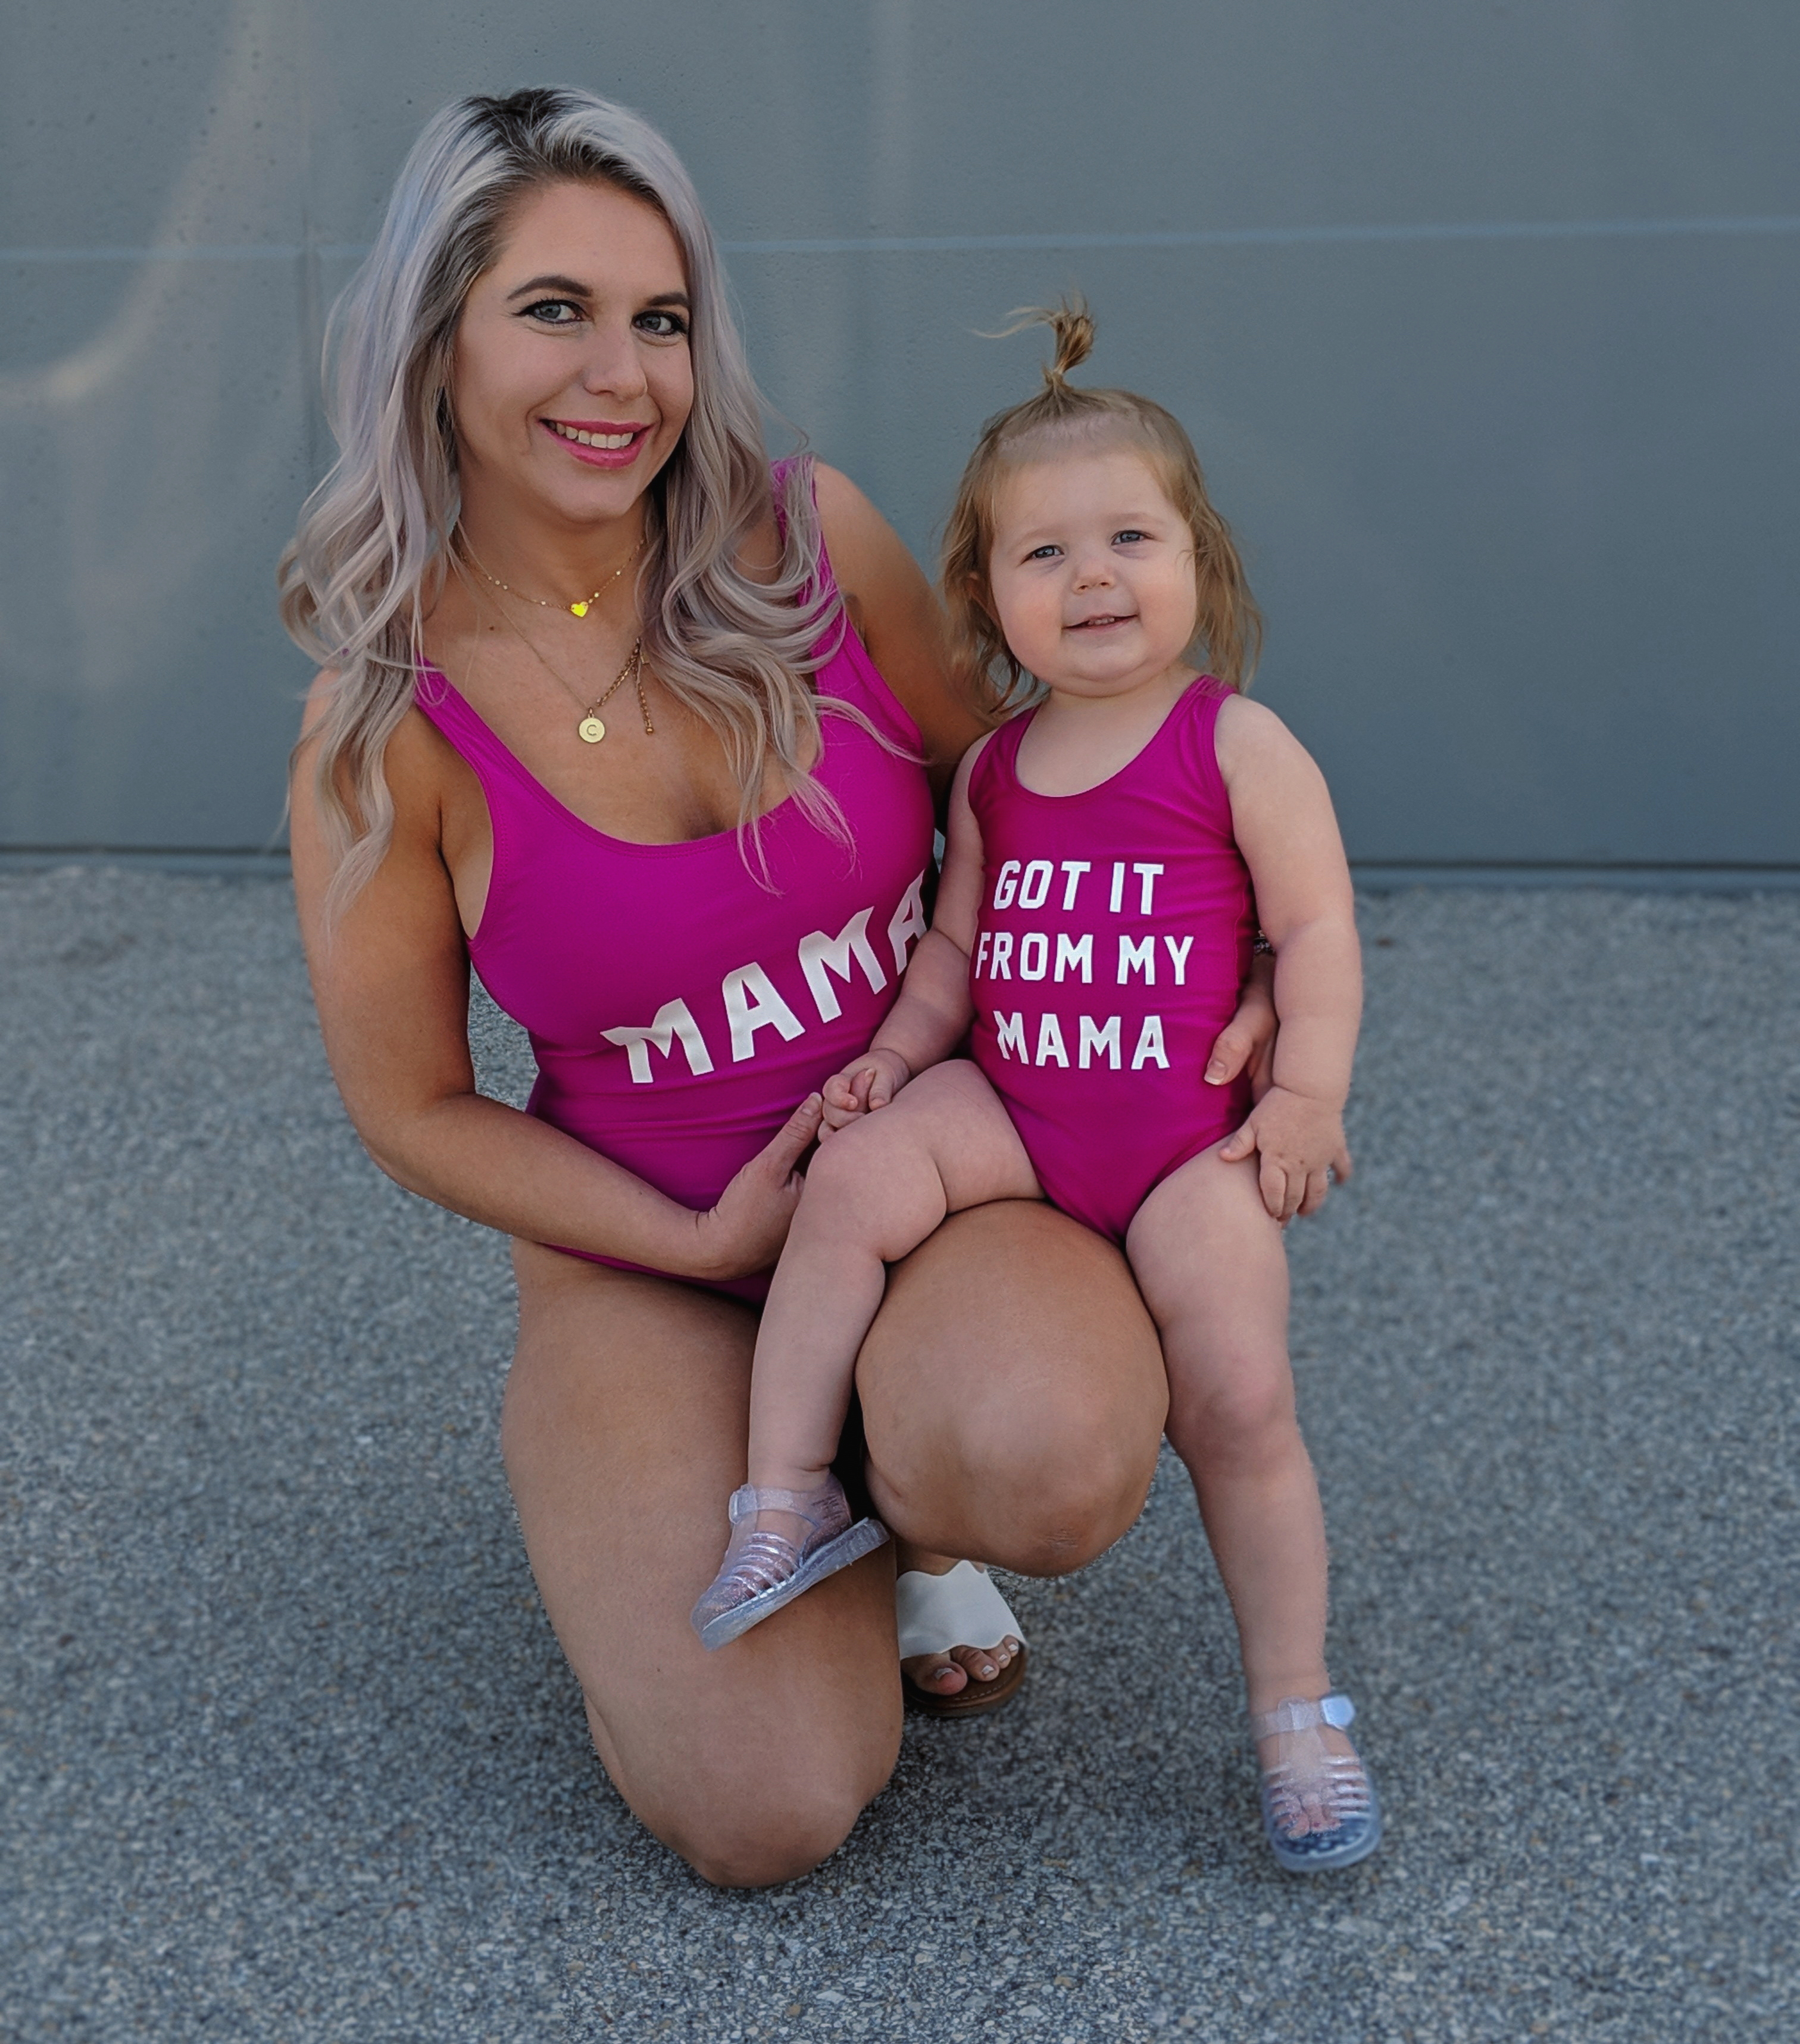 Finally a blogger showing some cheap mommy and me swimsuits! I can't afford those expensive suits and these mommy and me swimsuits are just as cute. Mama and Got it From My Mama swimsuits available in pink and other colors. There's also a Papa version for dads! The cutest mommy and me outfit ideas! #mommyandme #mommyandmeswimsuits #ltkfamily